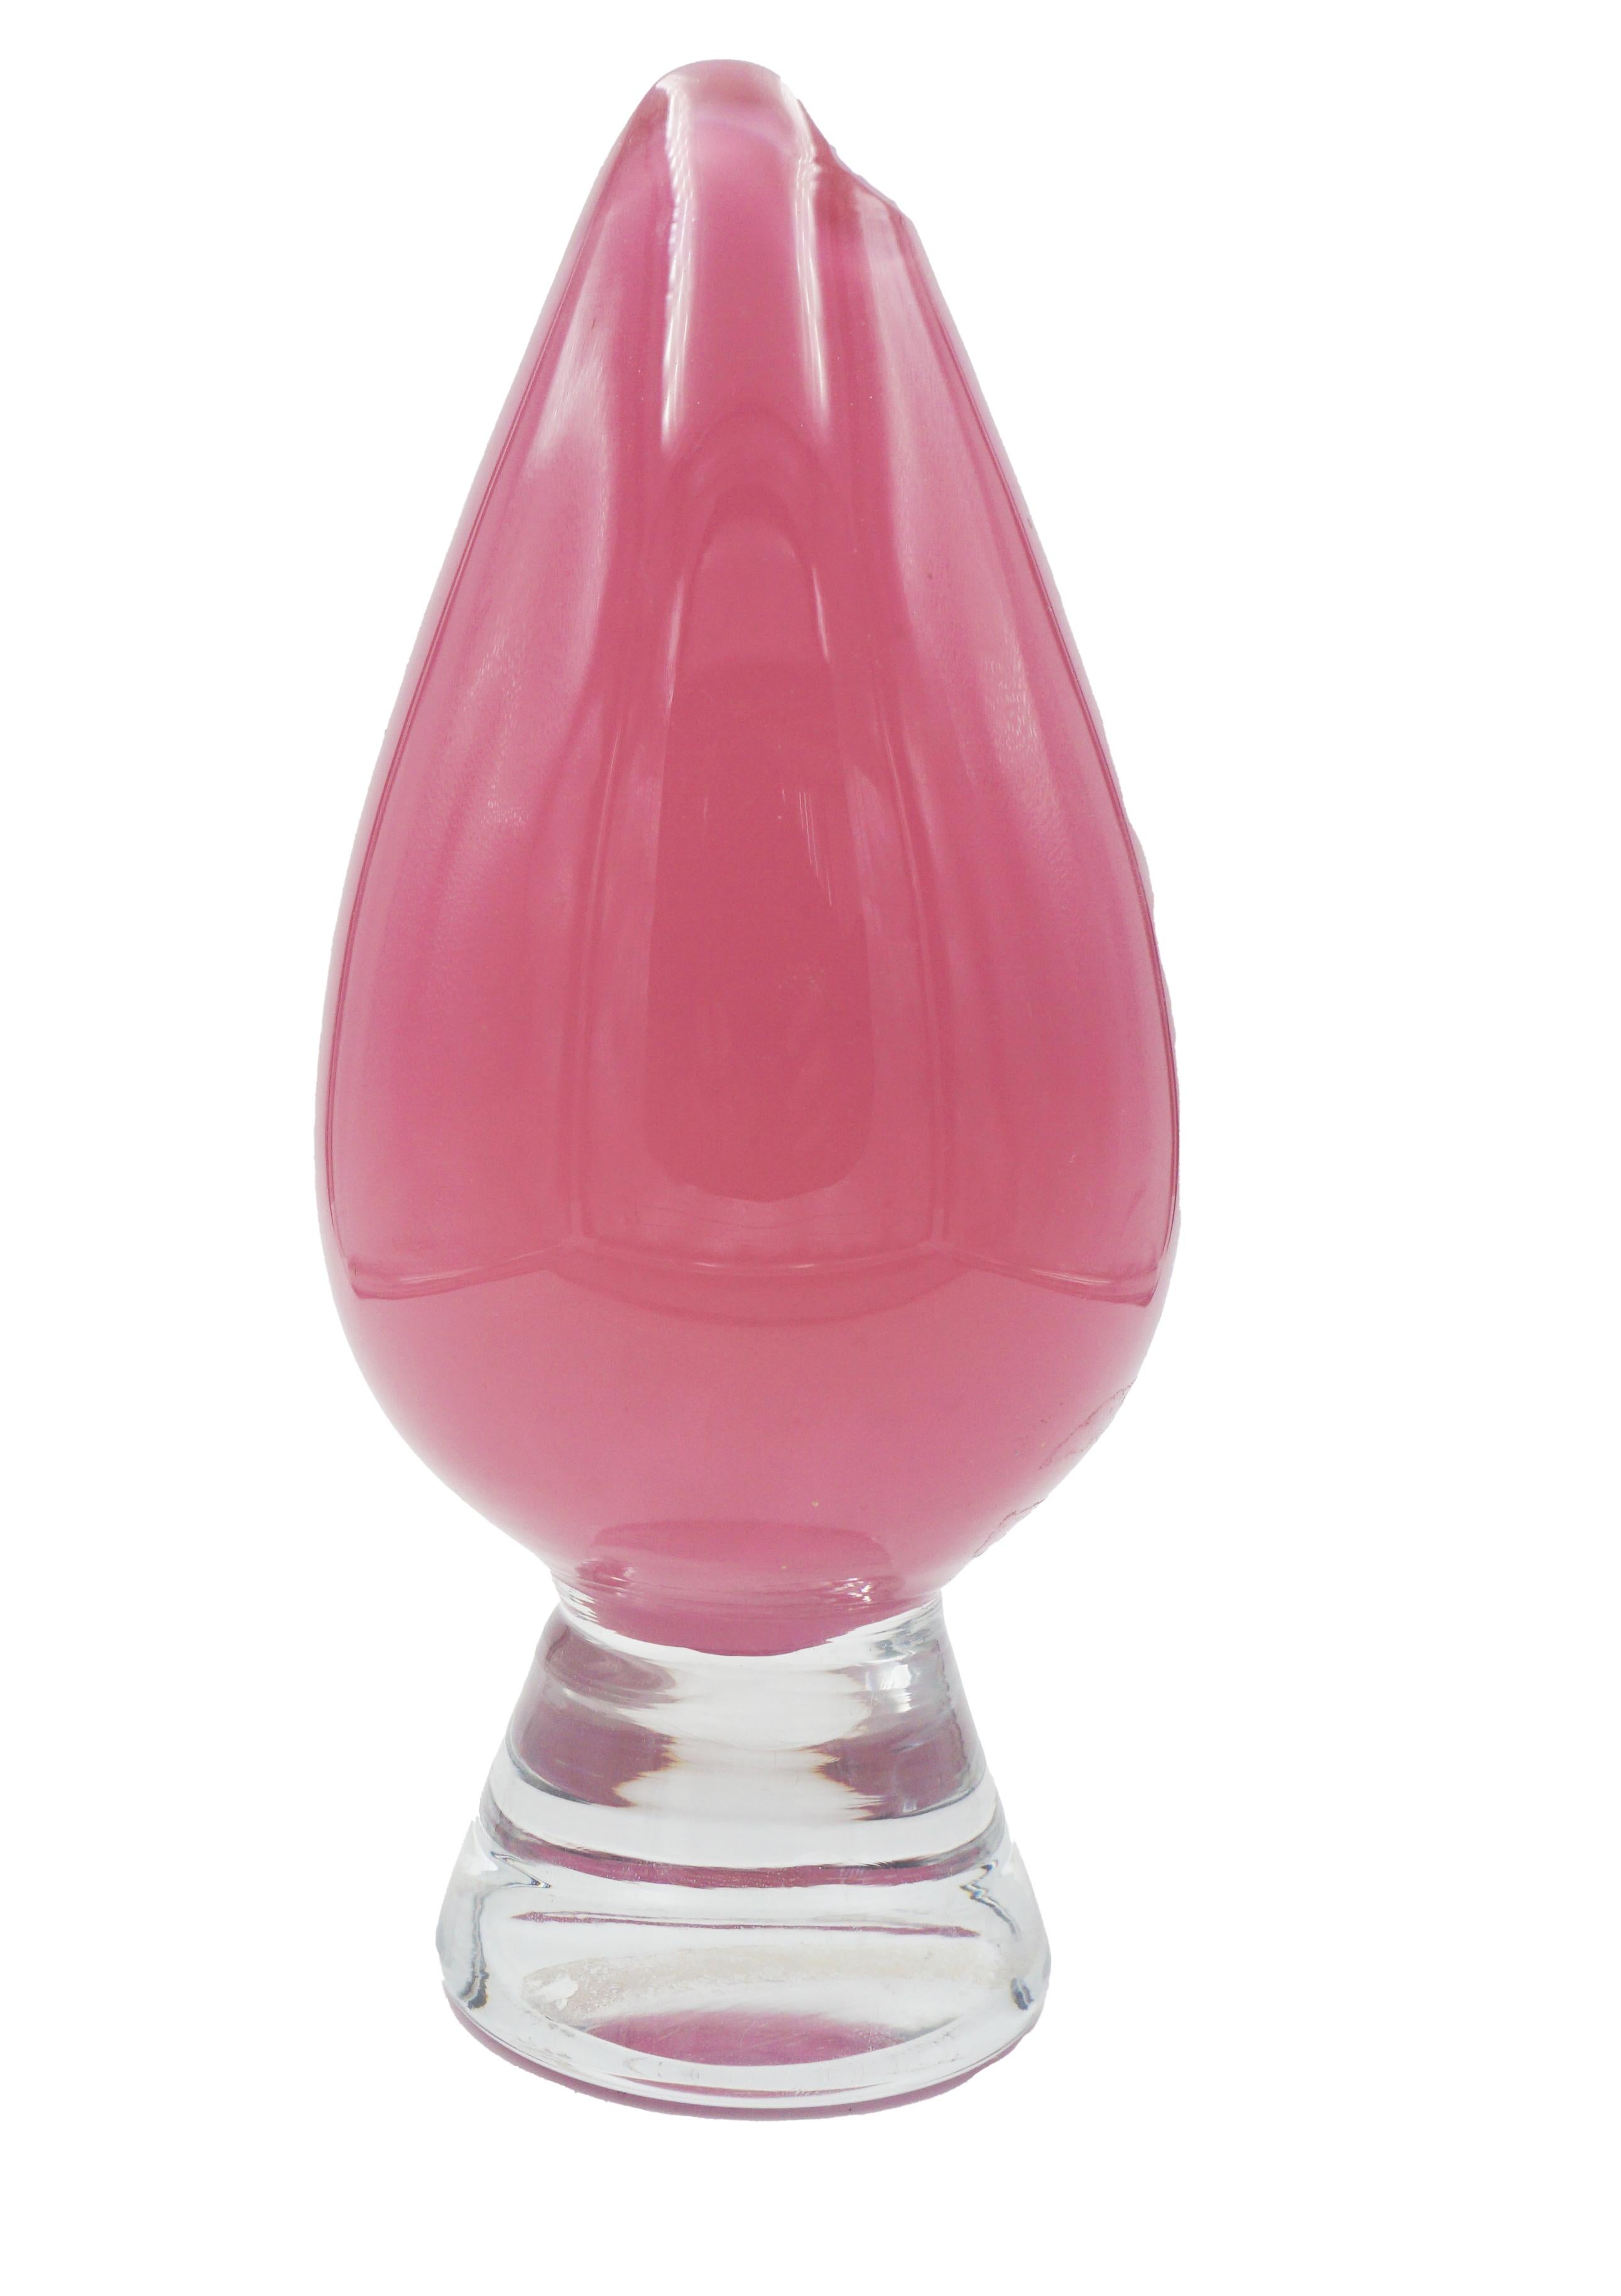 Beautiful vintage Murano, hand blown, Italian glass vase. This thick Murano vase depicts a very elegant solid blush pink top with a clear glass layer over the pink and a clear base. This exceptional shape mirrors the shape of a flower bud. Made in